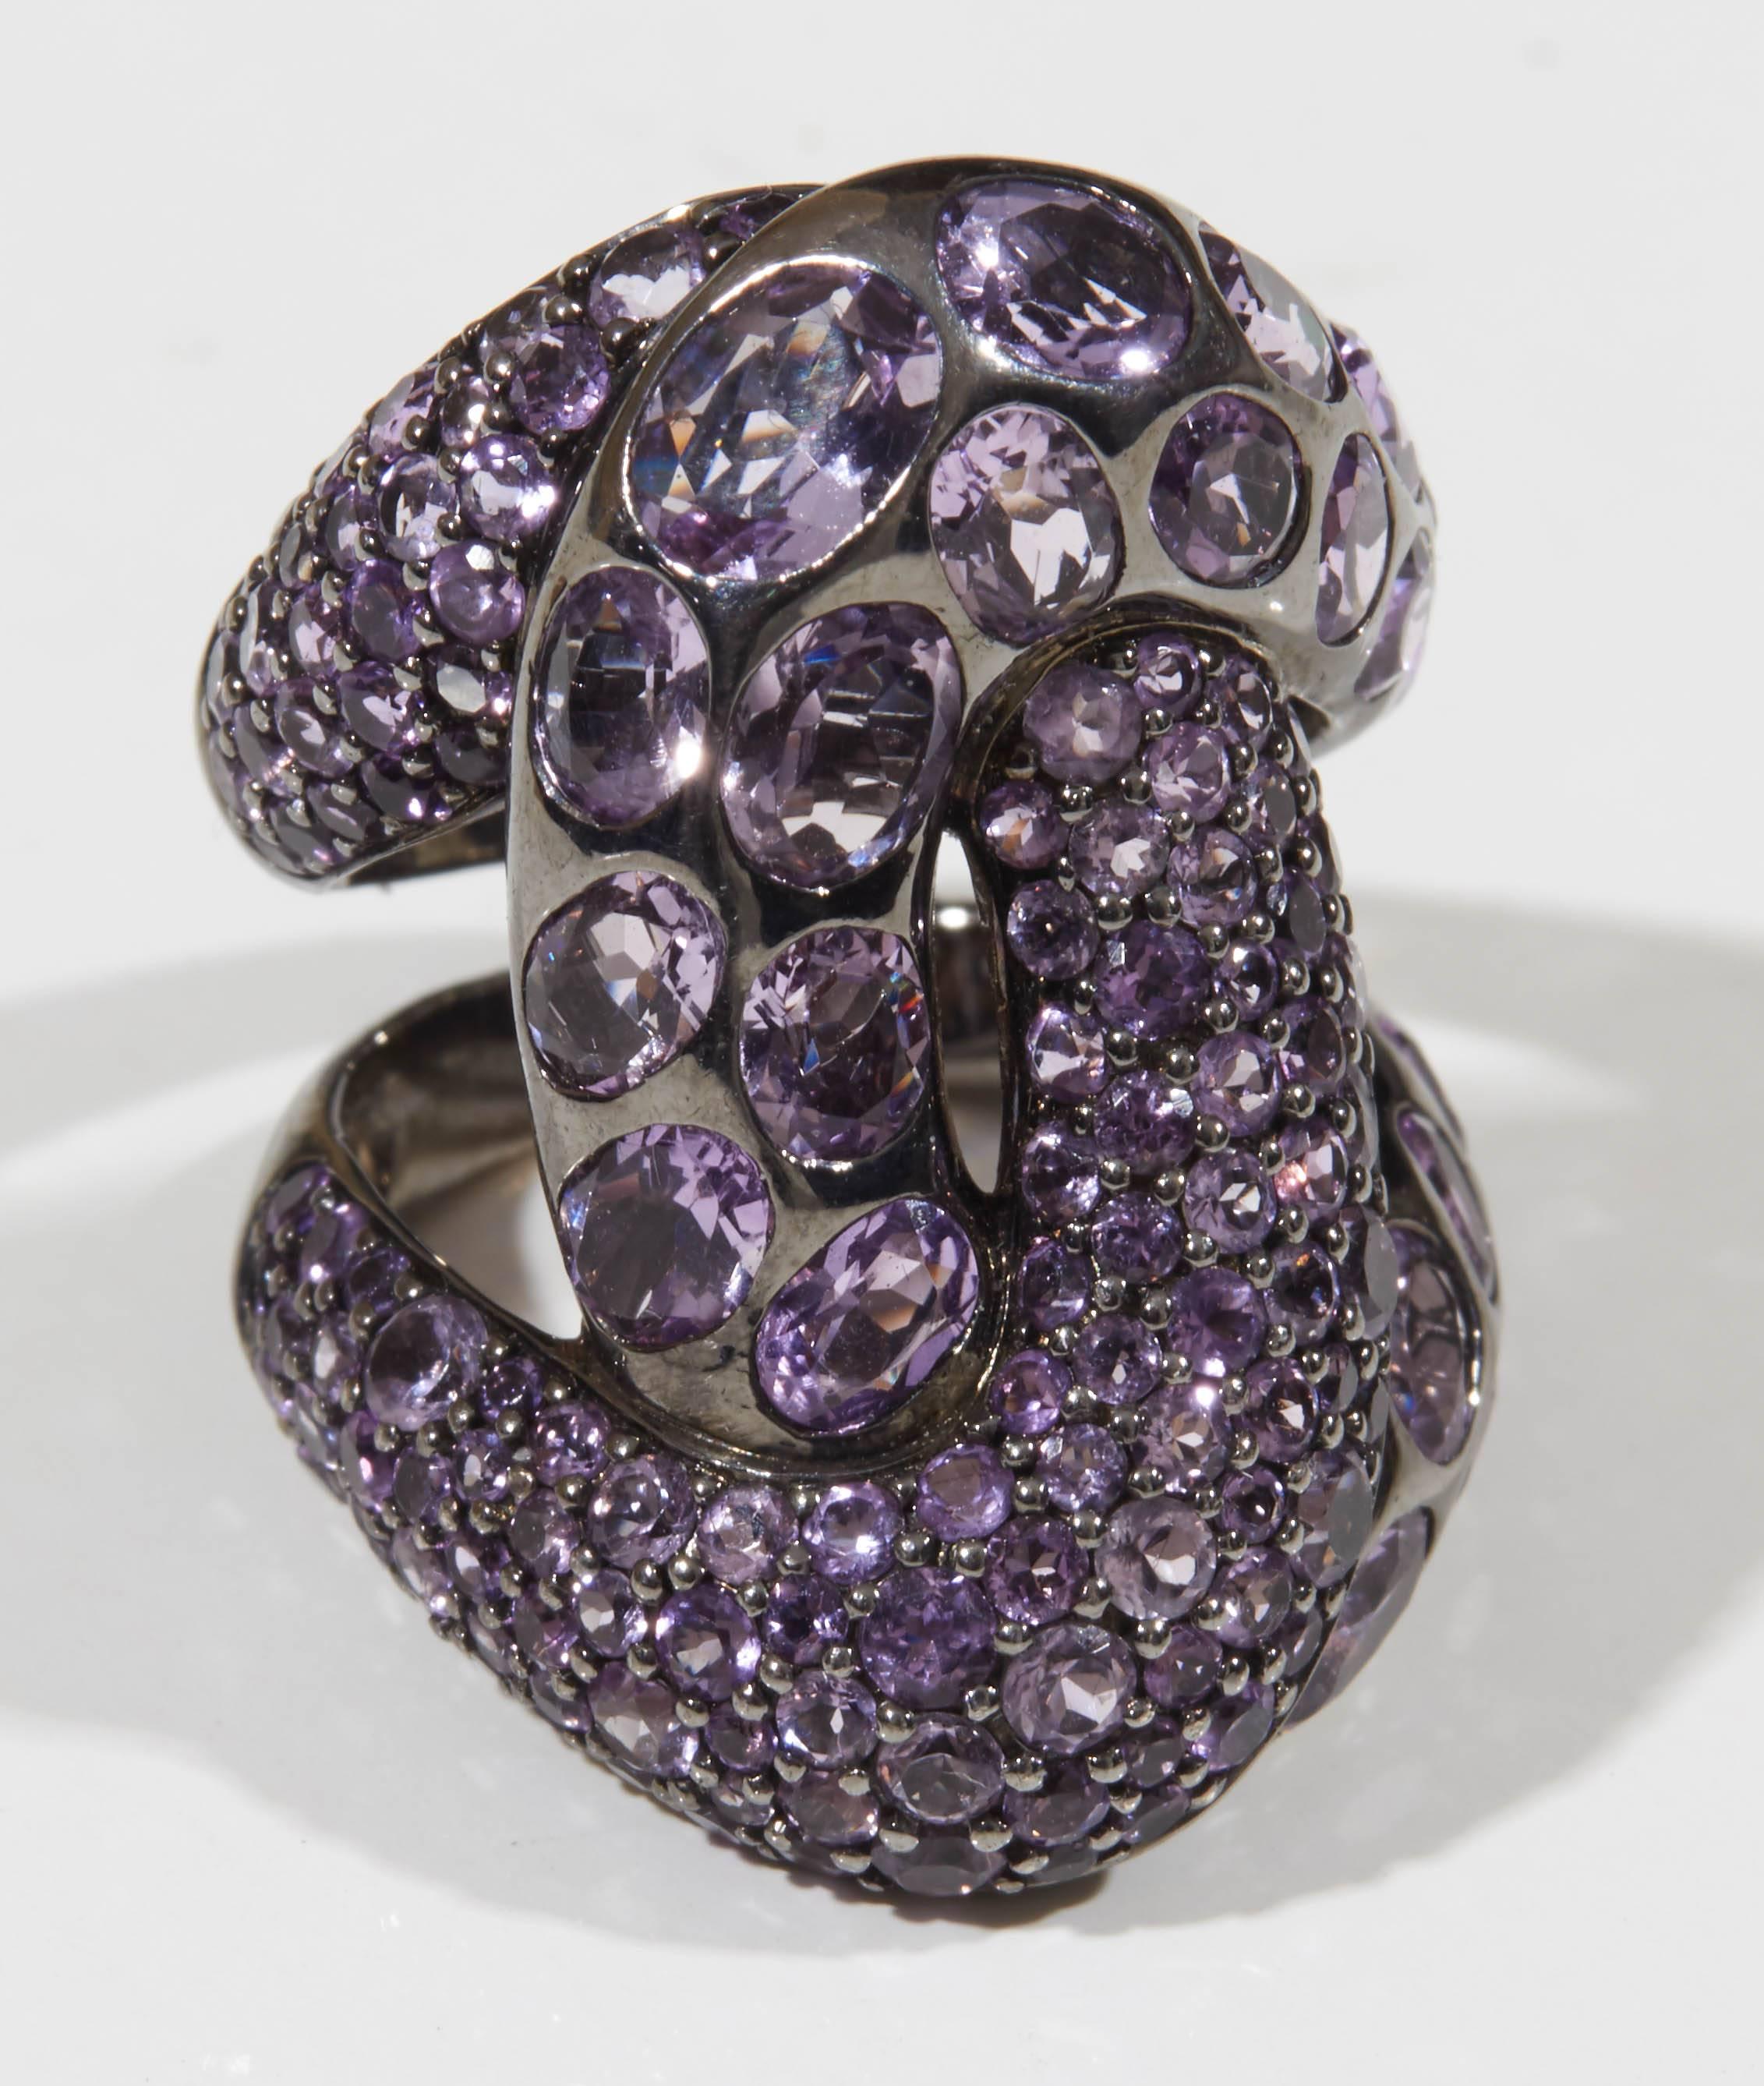 A rhodium plated sterling silver and 18kt yellow gold knot ring. The ring is set with 6.80cts of amethysts. Size 6.50
Length: 1.25 inches
Width: .75 inch